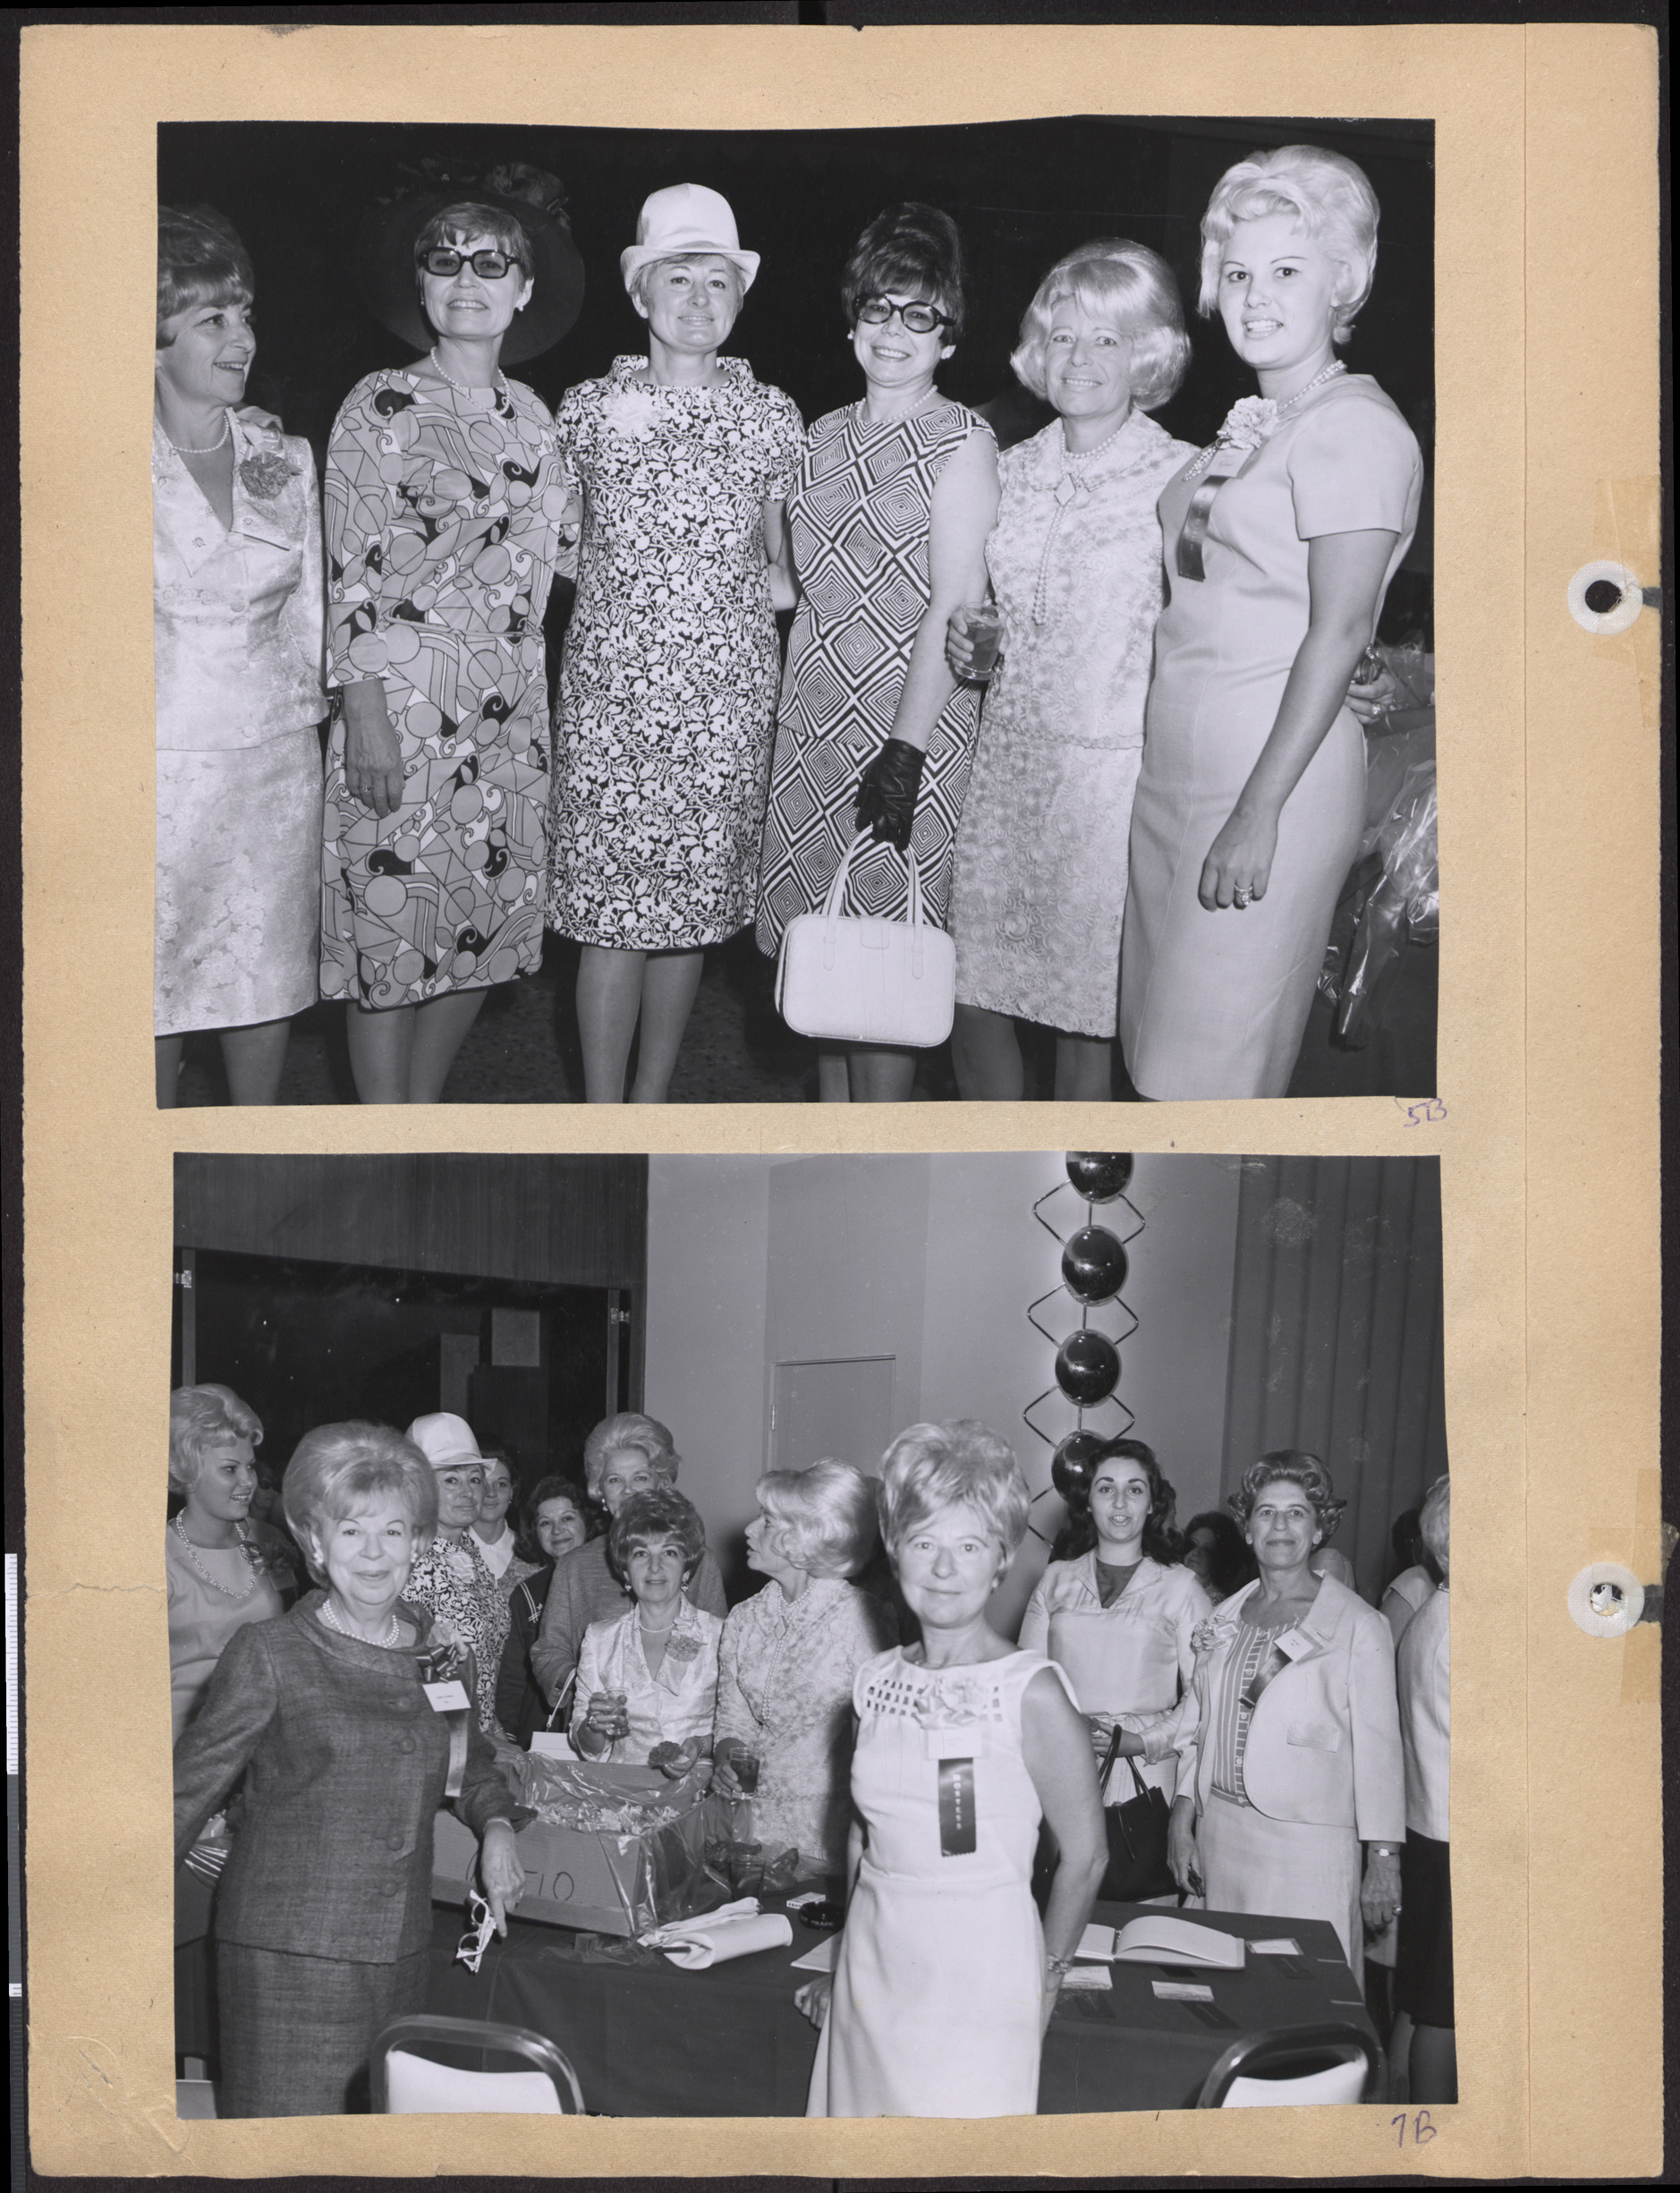 Photographs of Hadassah's Second Donor Luncheon, May 16, 1966